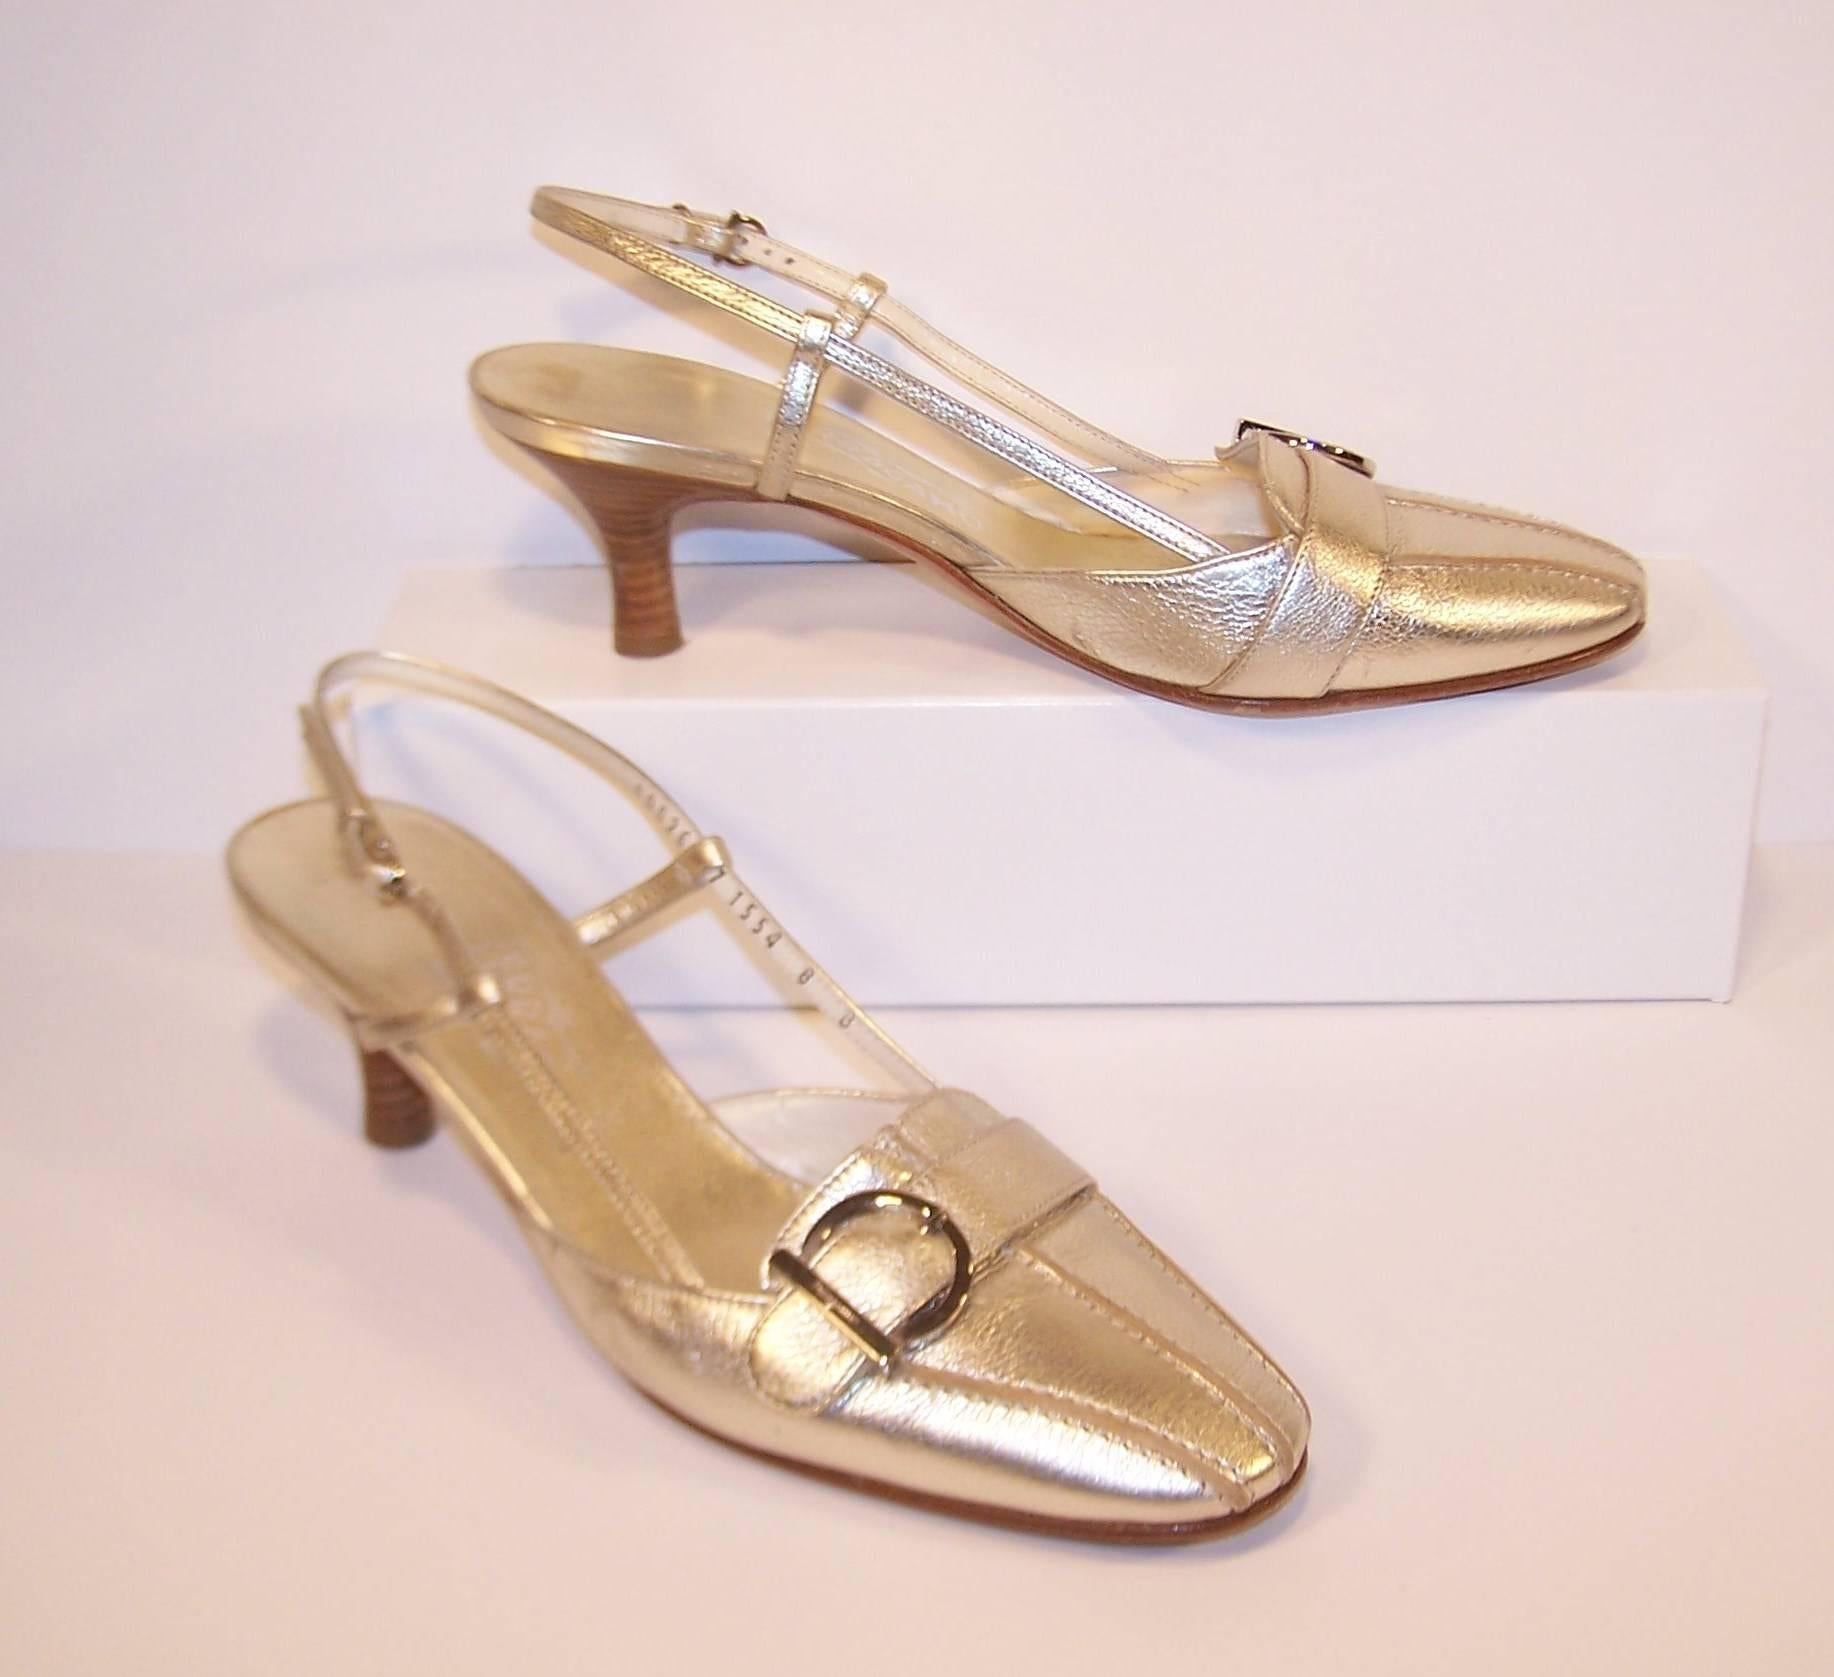 Love the versatility of these Ferragamo shoes!  The platinum leather works well as gold or silver shoes and the loafer style with stacked wooden heels can be worn as dressy or dressed down.  The adjustable slingback and 2.5